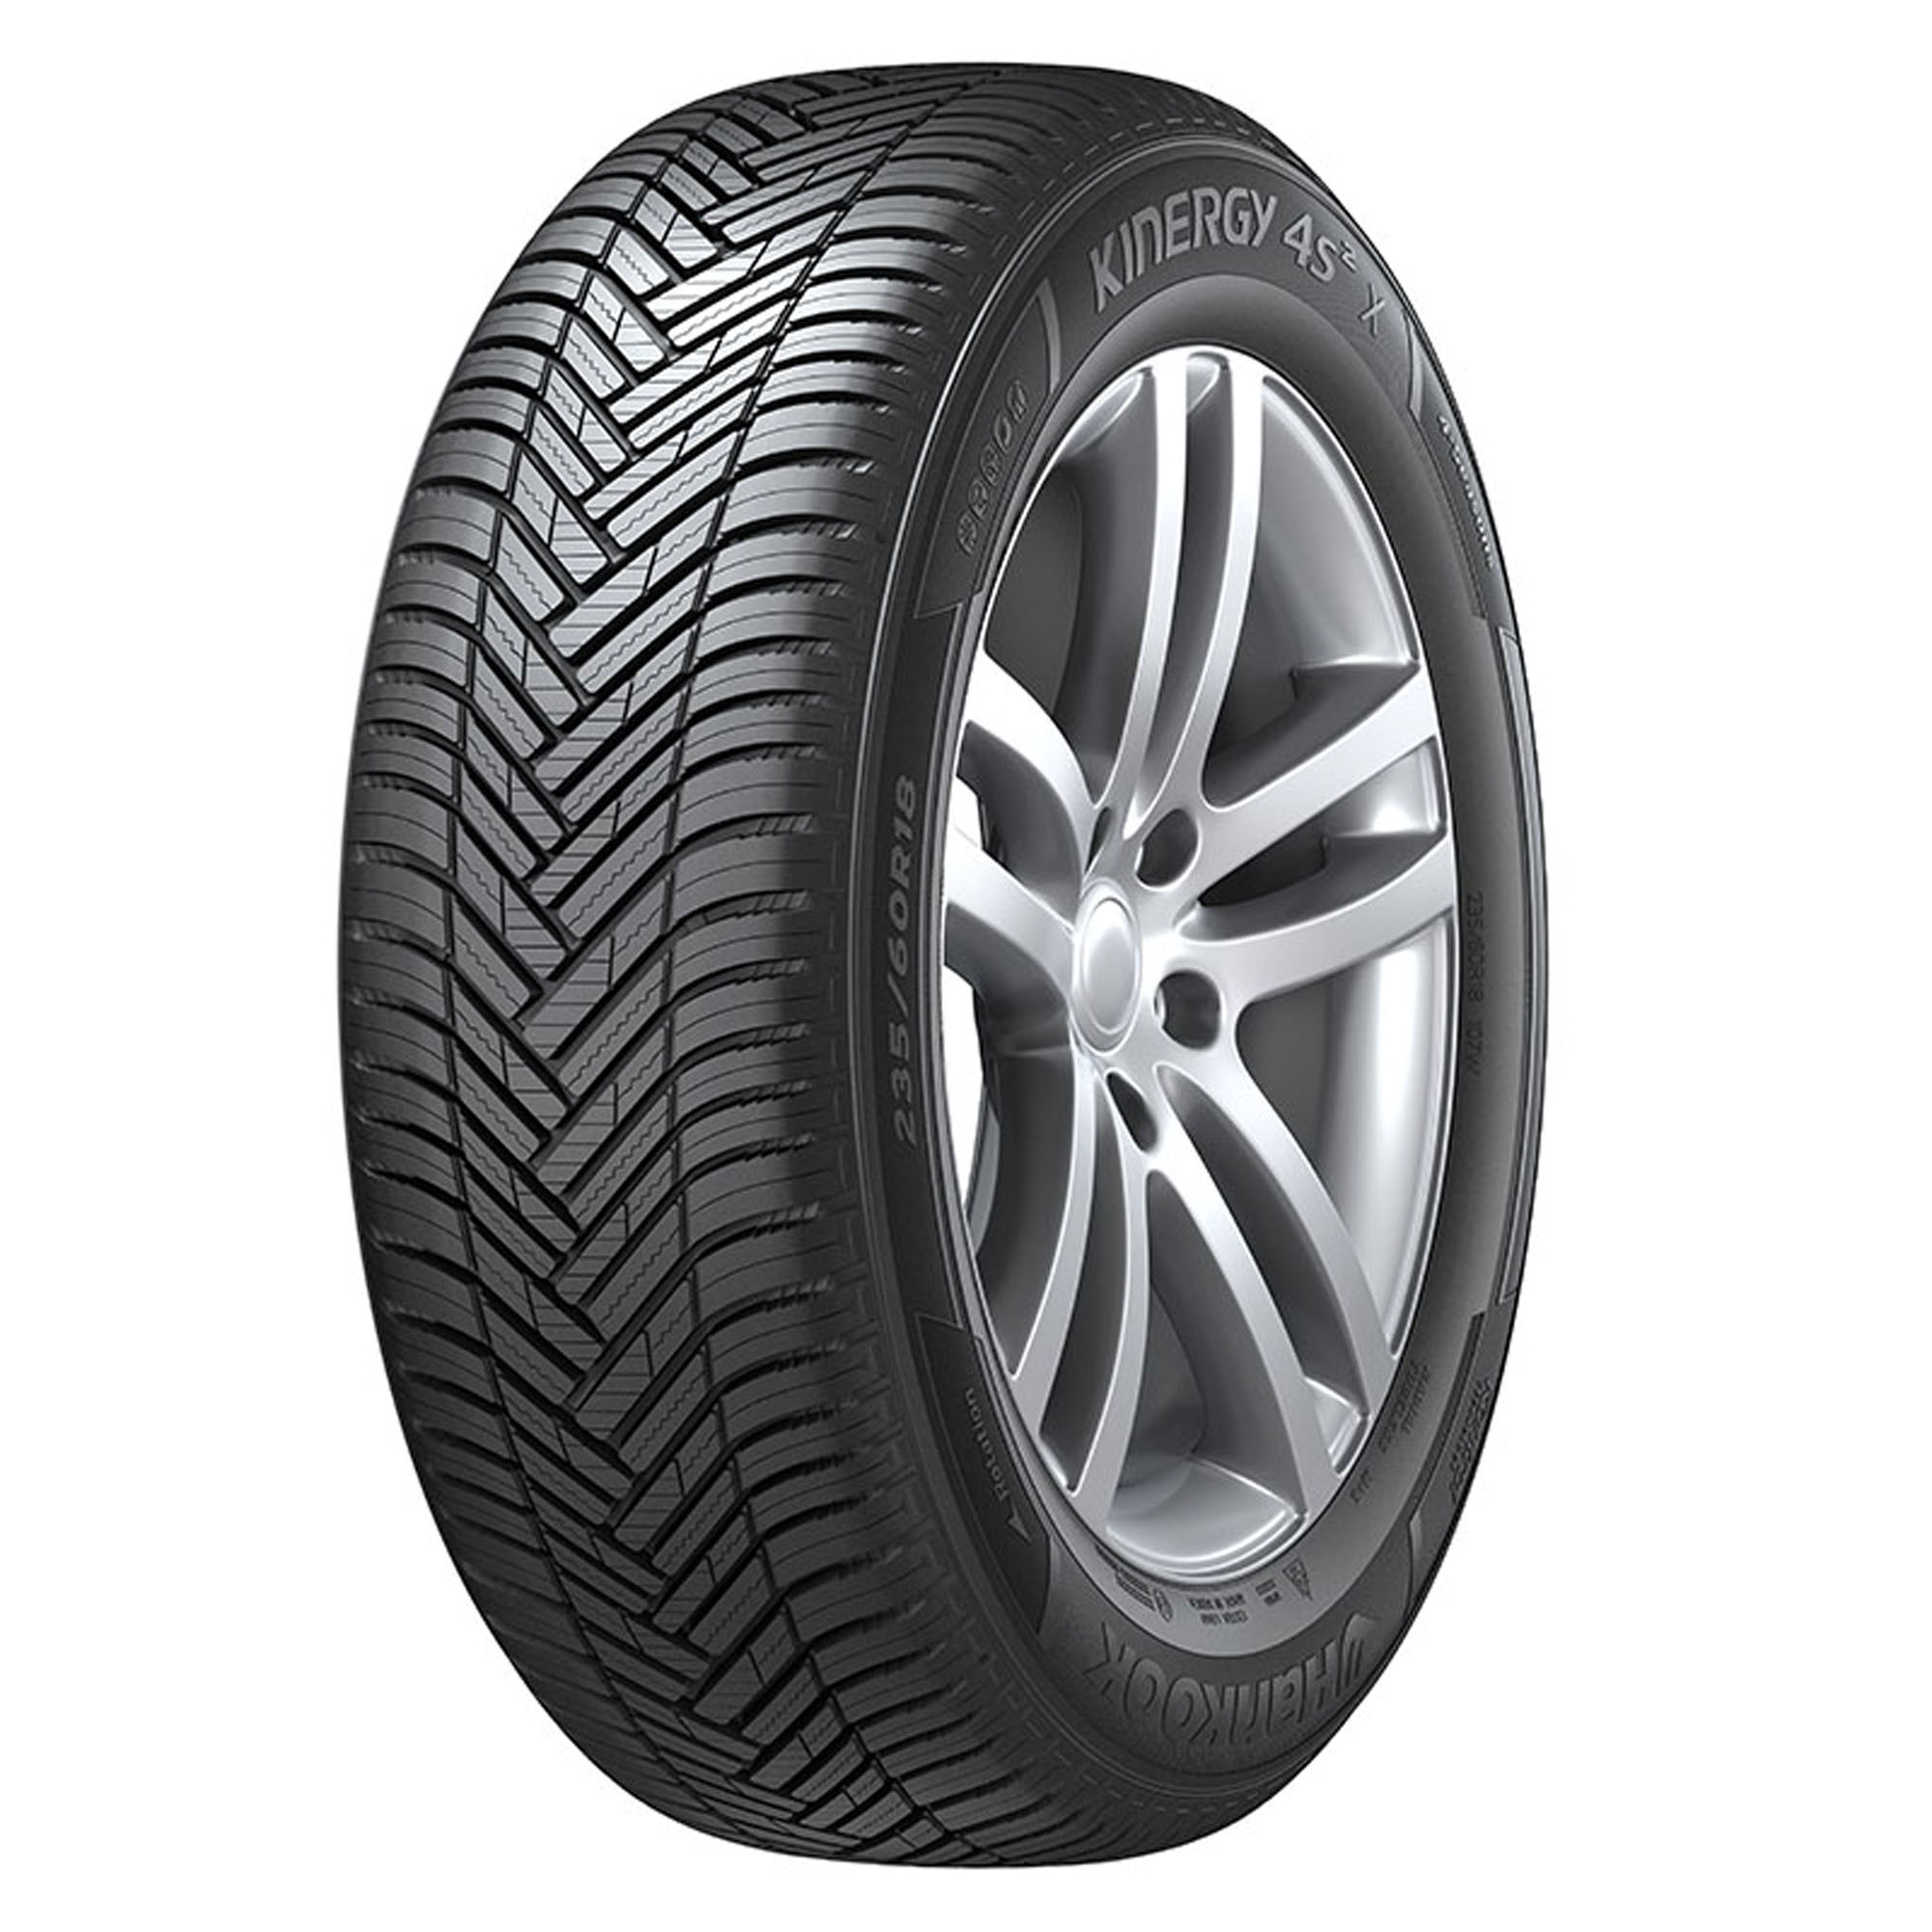 Hankook Kinergy 4S2 X (H750A) All Weather 225/60R17 99H SUV/Crossover Tire - image 1 of 4